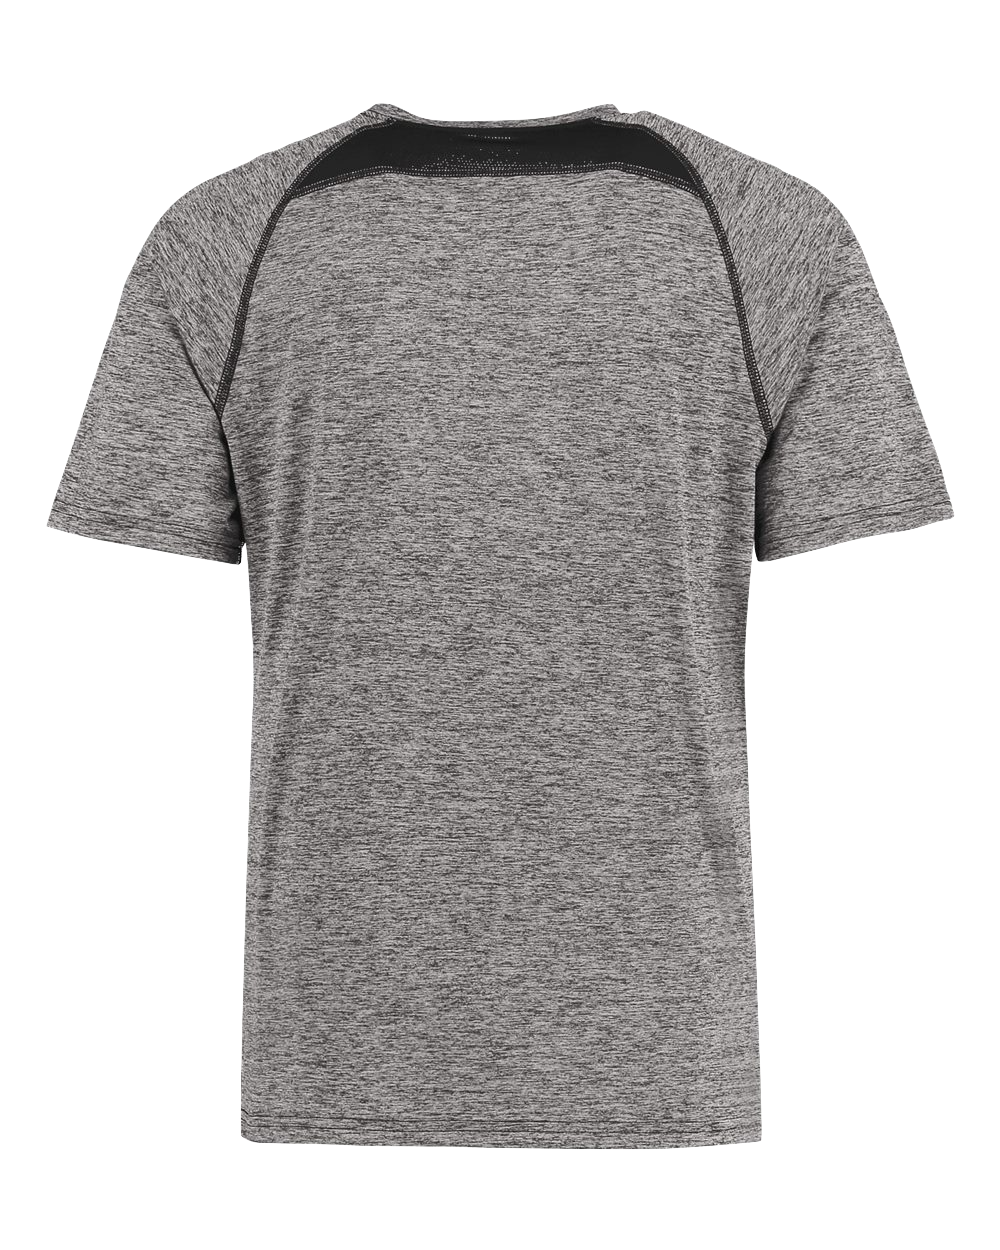 BE PRESENT. FULL CHEST Poly/Elastane High Performance T-Shirt with UPF 50+